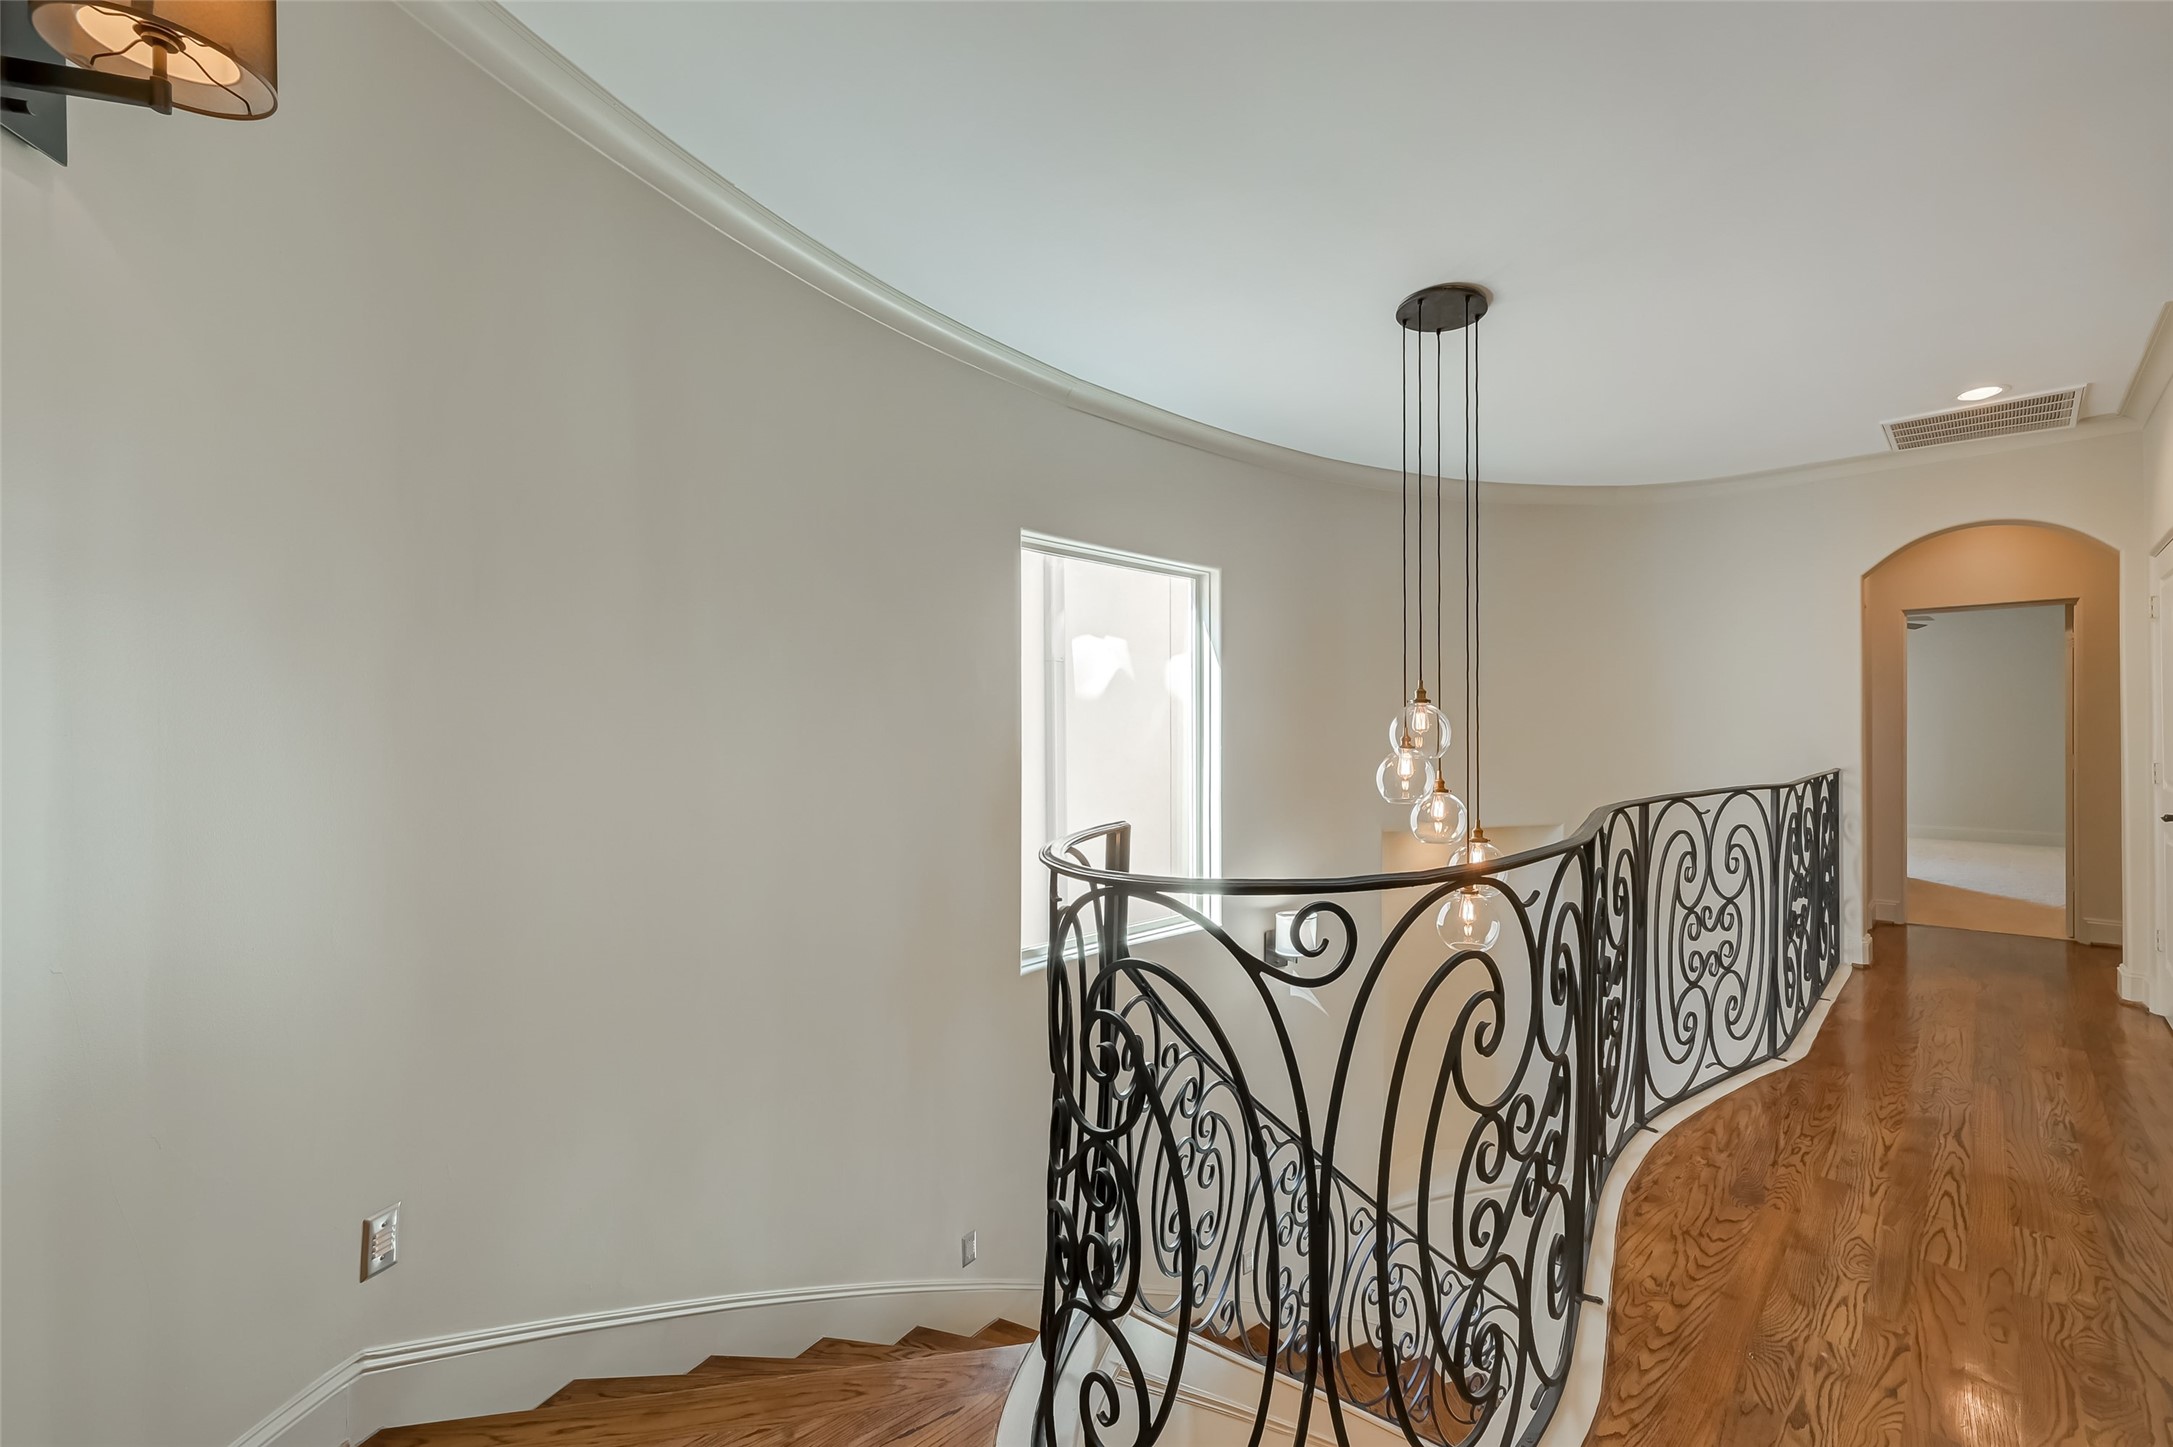 Second floor hall showing beautiful hardwoods and​​‌​​​​‌​​‌‌​‌‌​​​‌‌​‌​‌​‌​​​‌​​ railing.